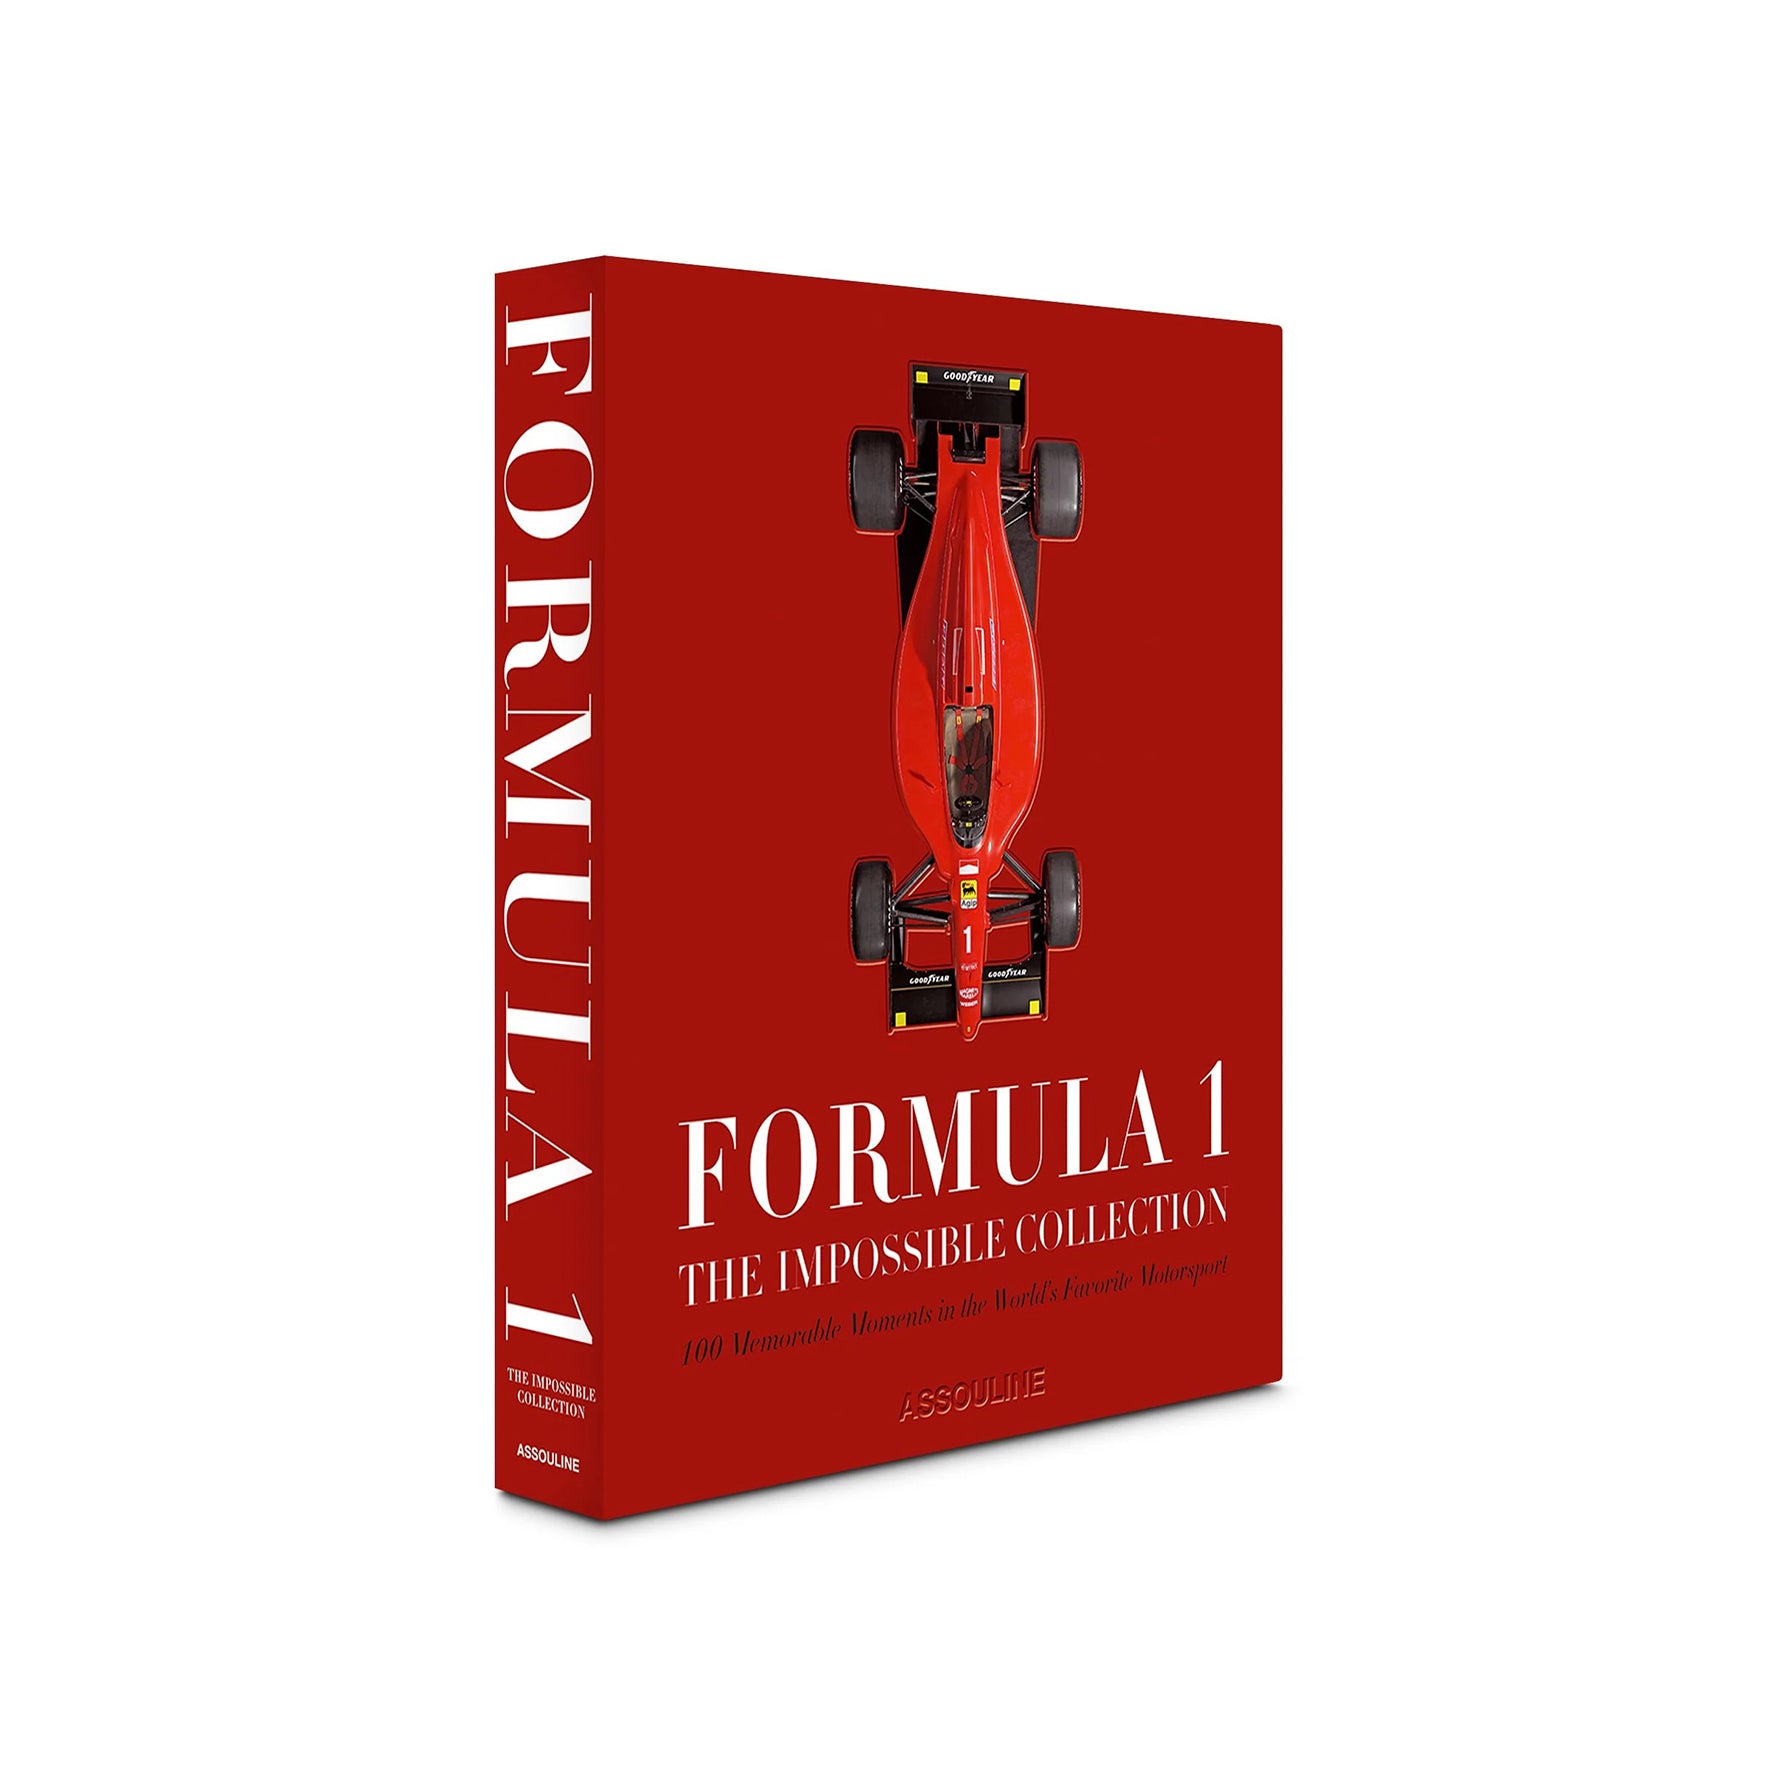 Formula 1: The Impossible Collection by Assouline